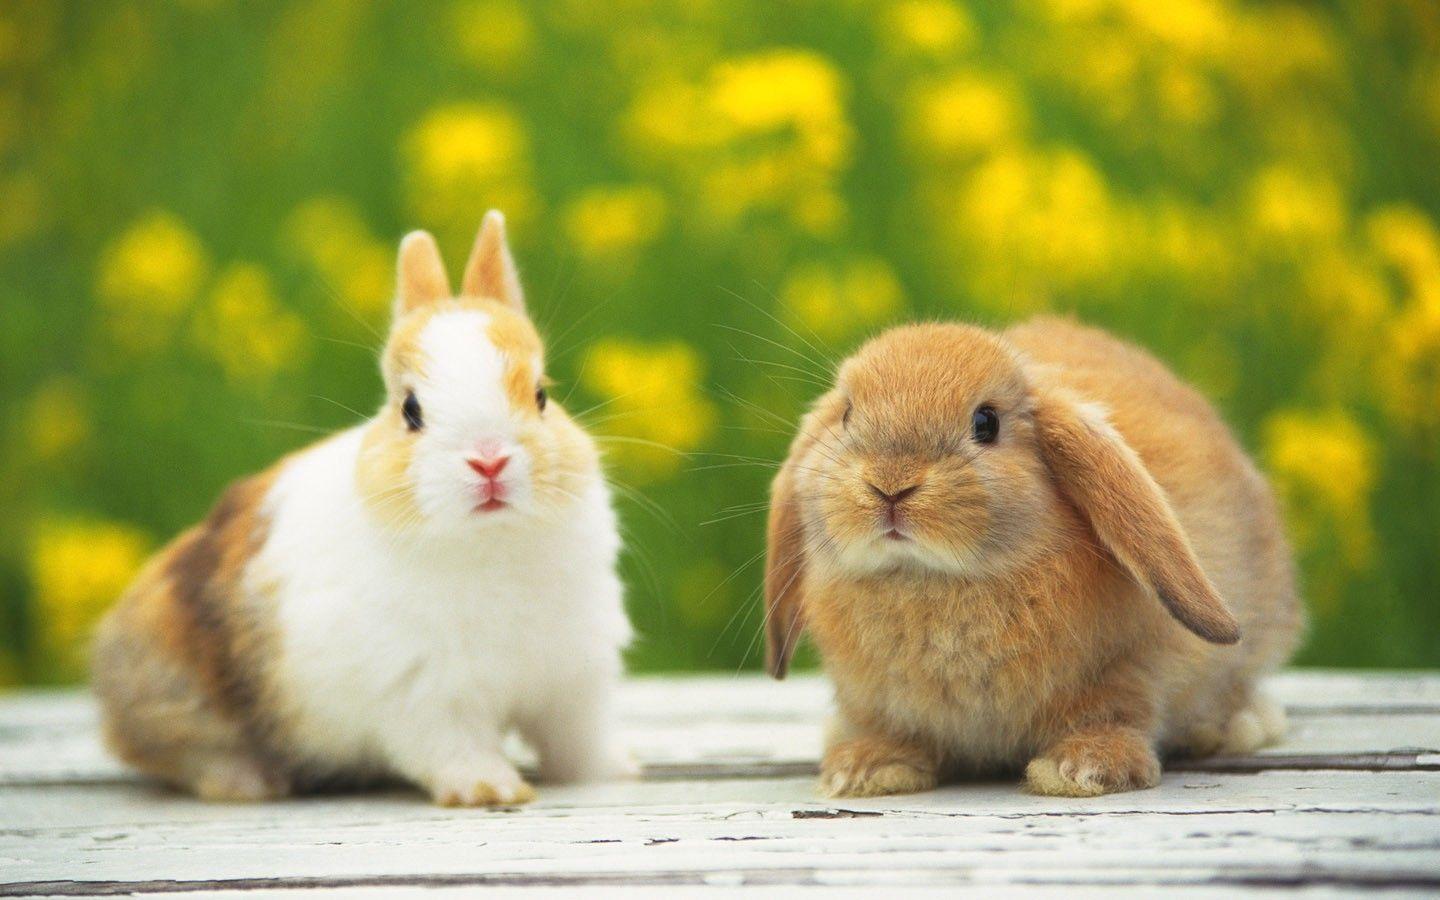 Cute Baby Bunny Wallpaper. fashionplaceface